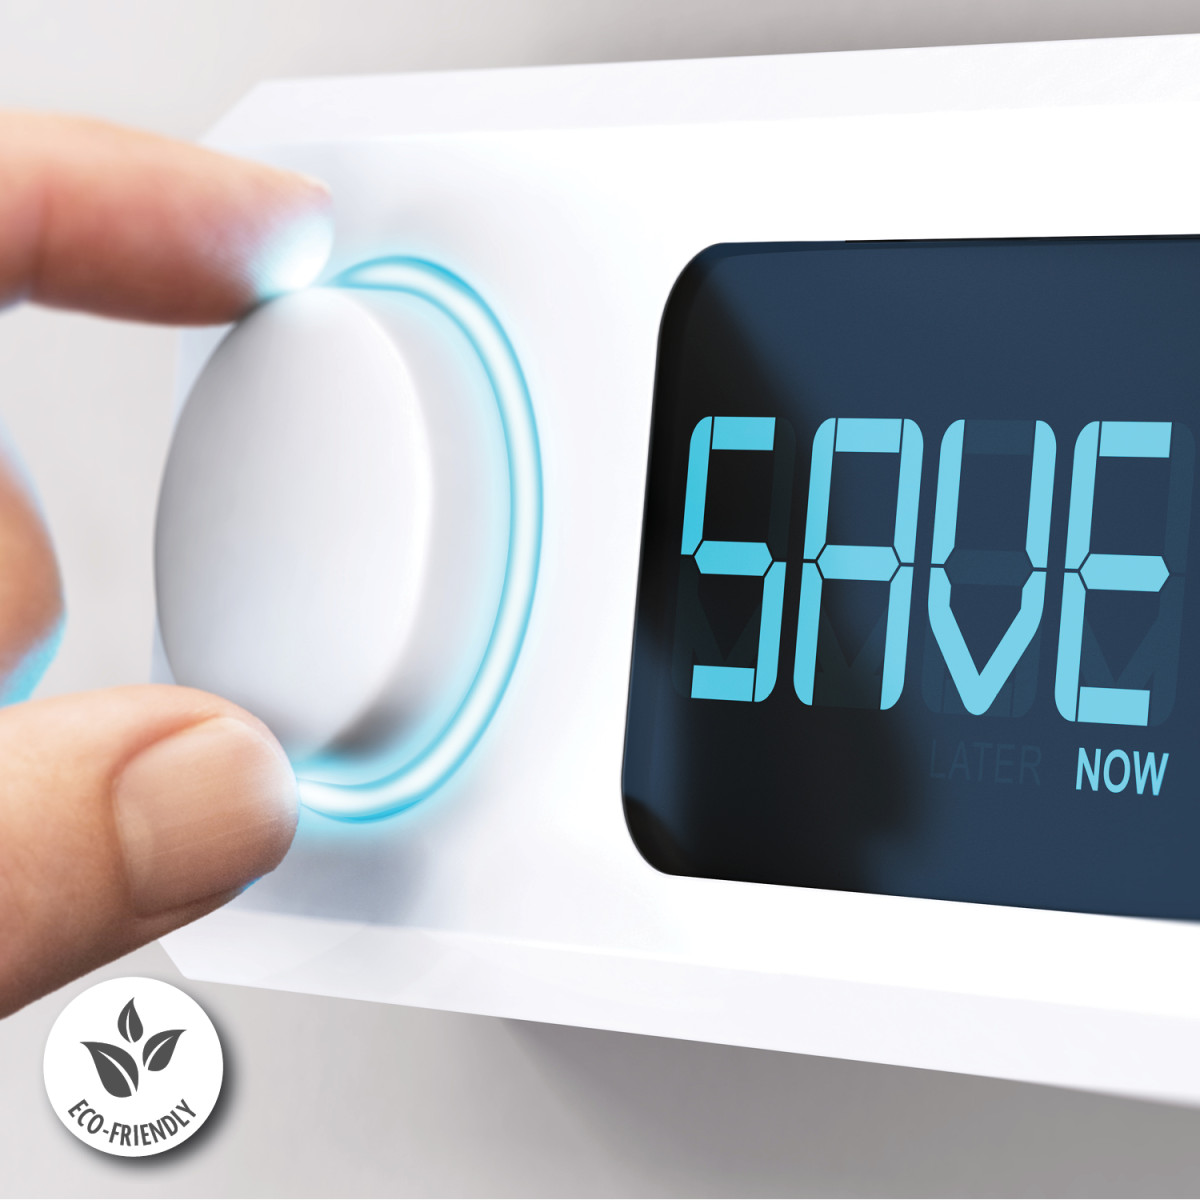 Reduce Your Energy Usage